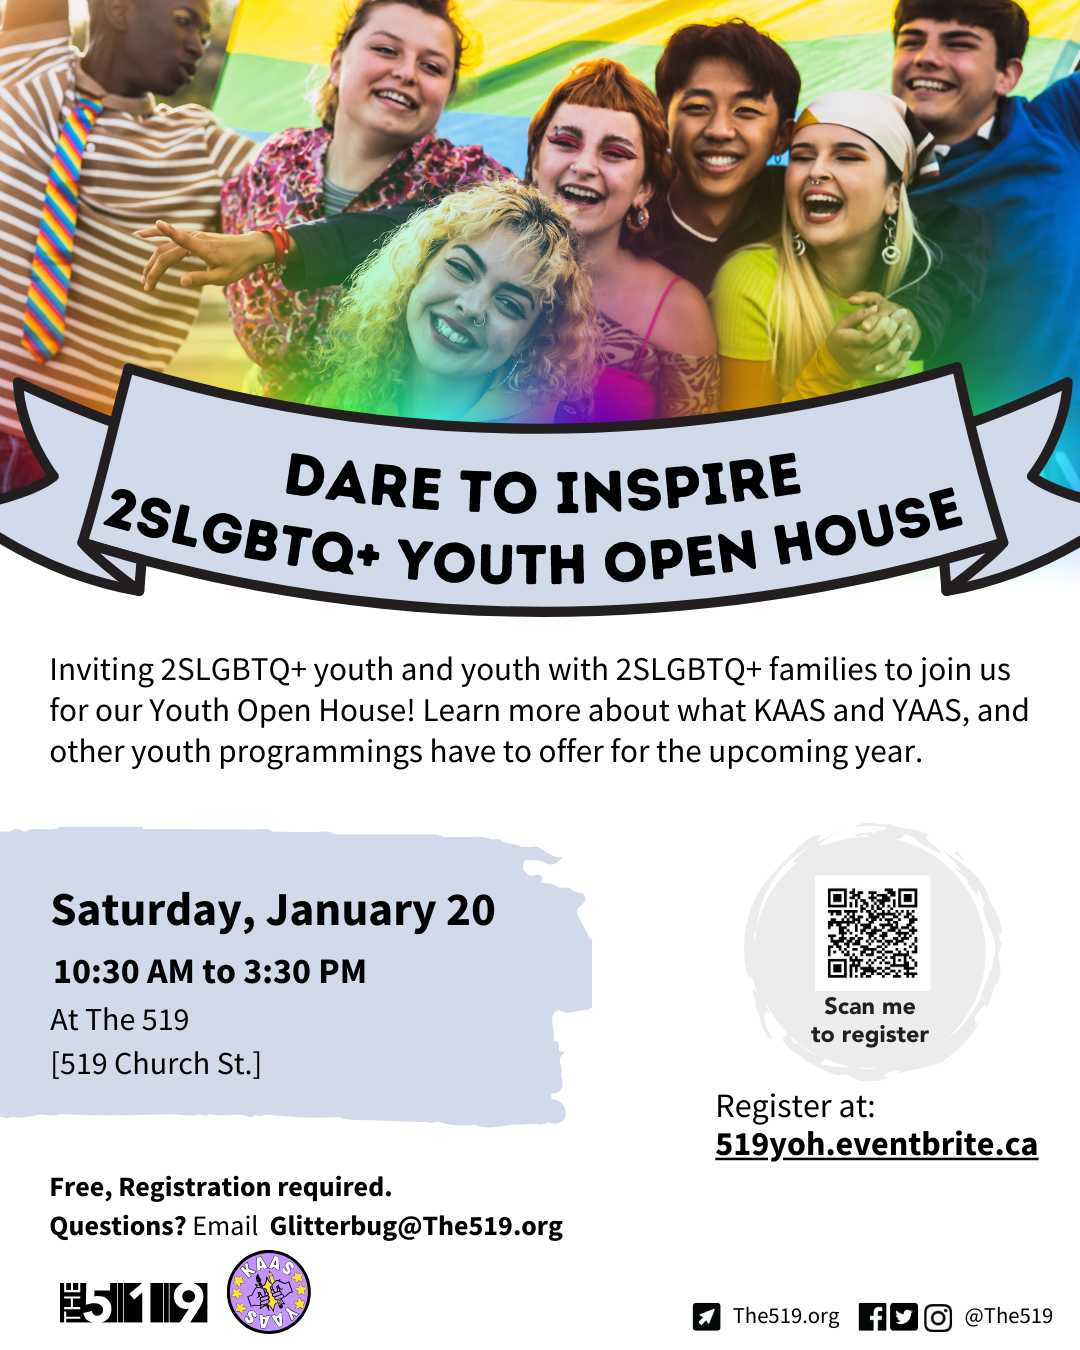 Youth Action and Arts Space (10-14 Years) - The 519